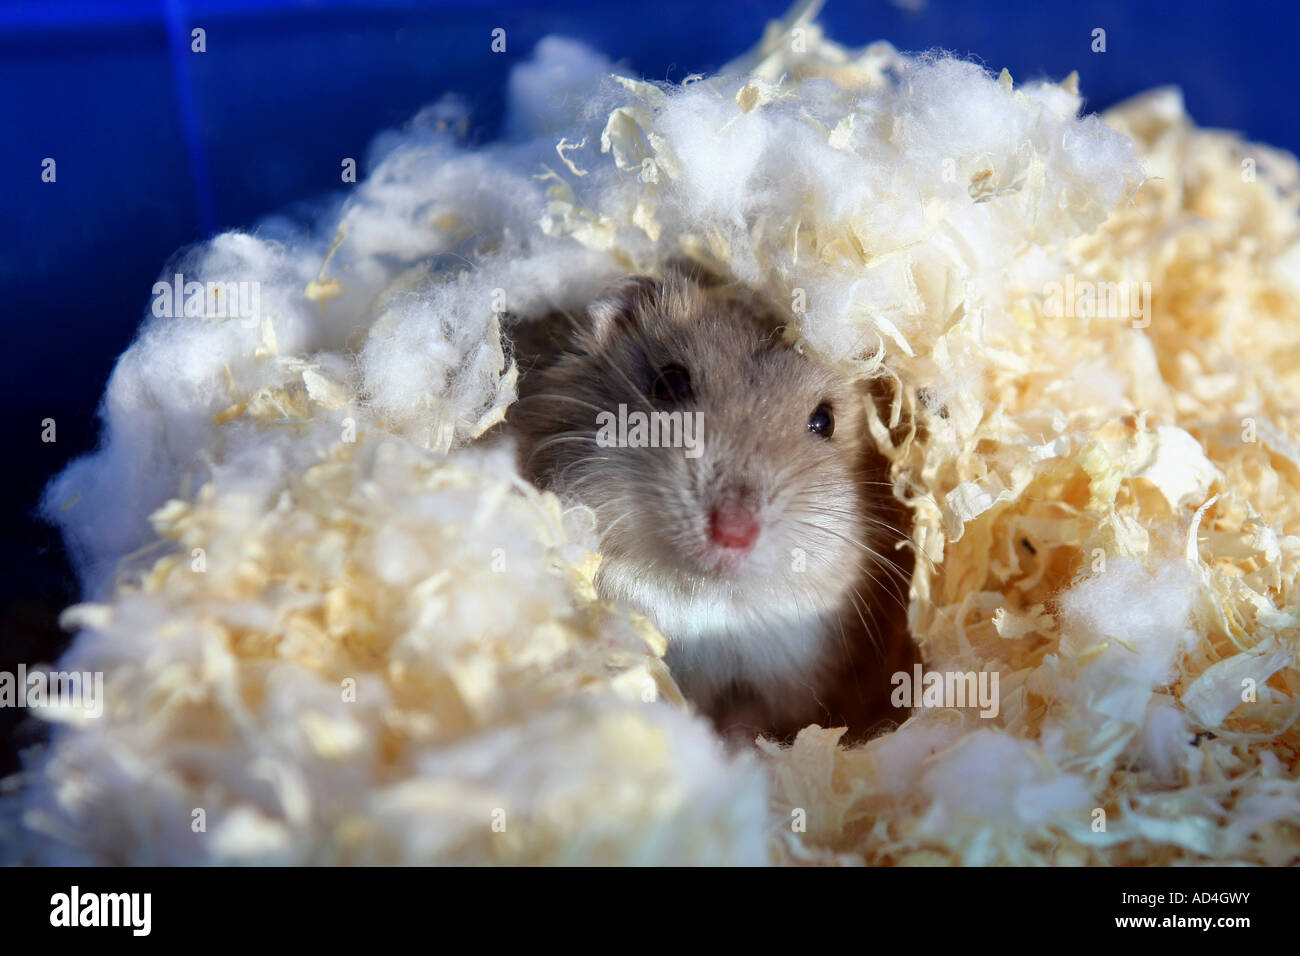 Hamster in sawdust and cotton Stock Photo - Alamy